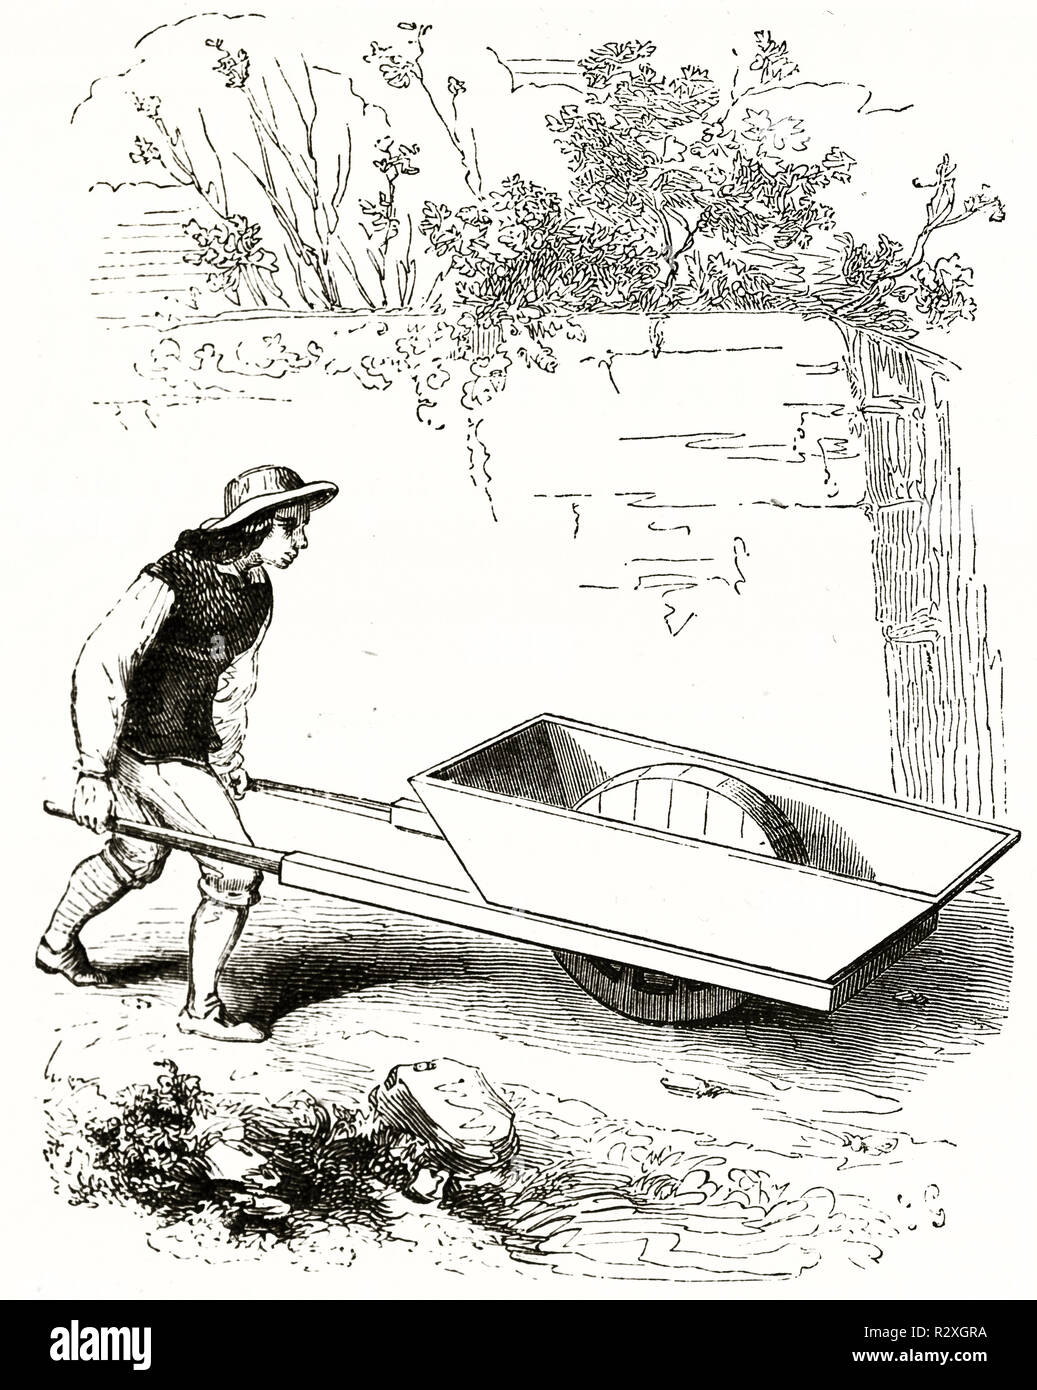 Old illustration of a wooden wheelbarrow. By unidentified author, publ. on Magasin Pittoresque, Paris, 1846 Stock Photo